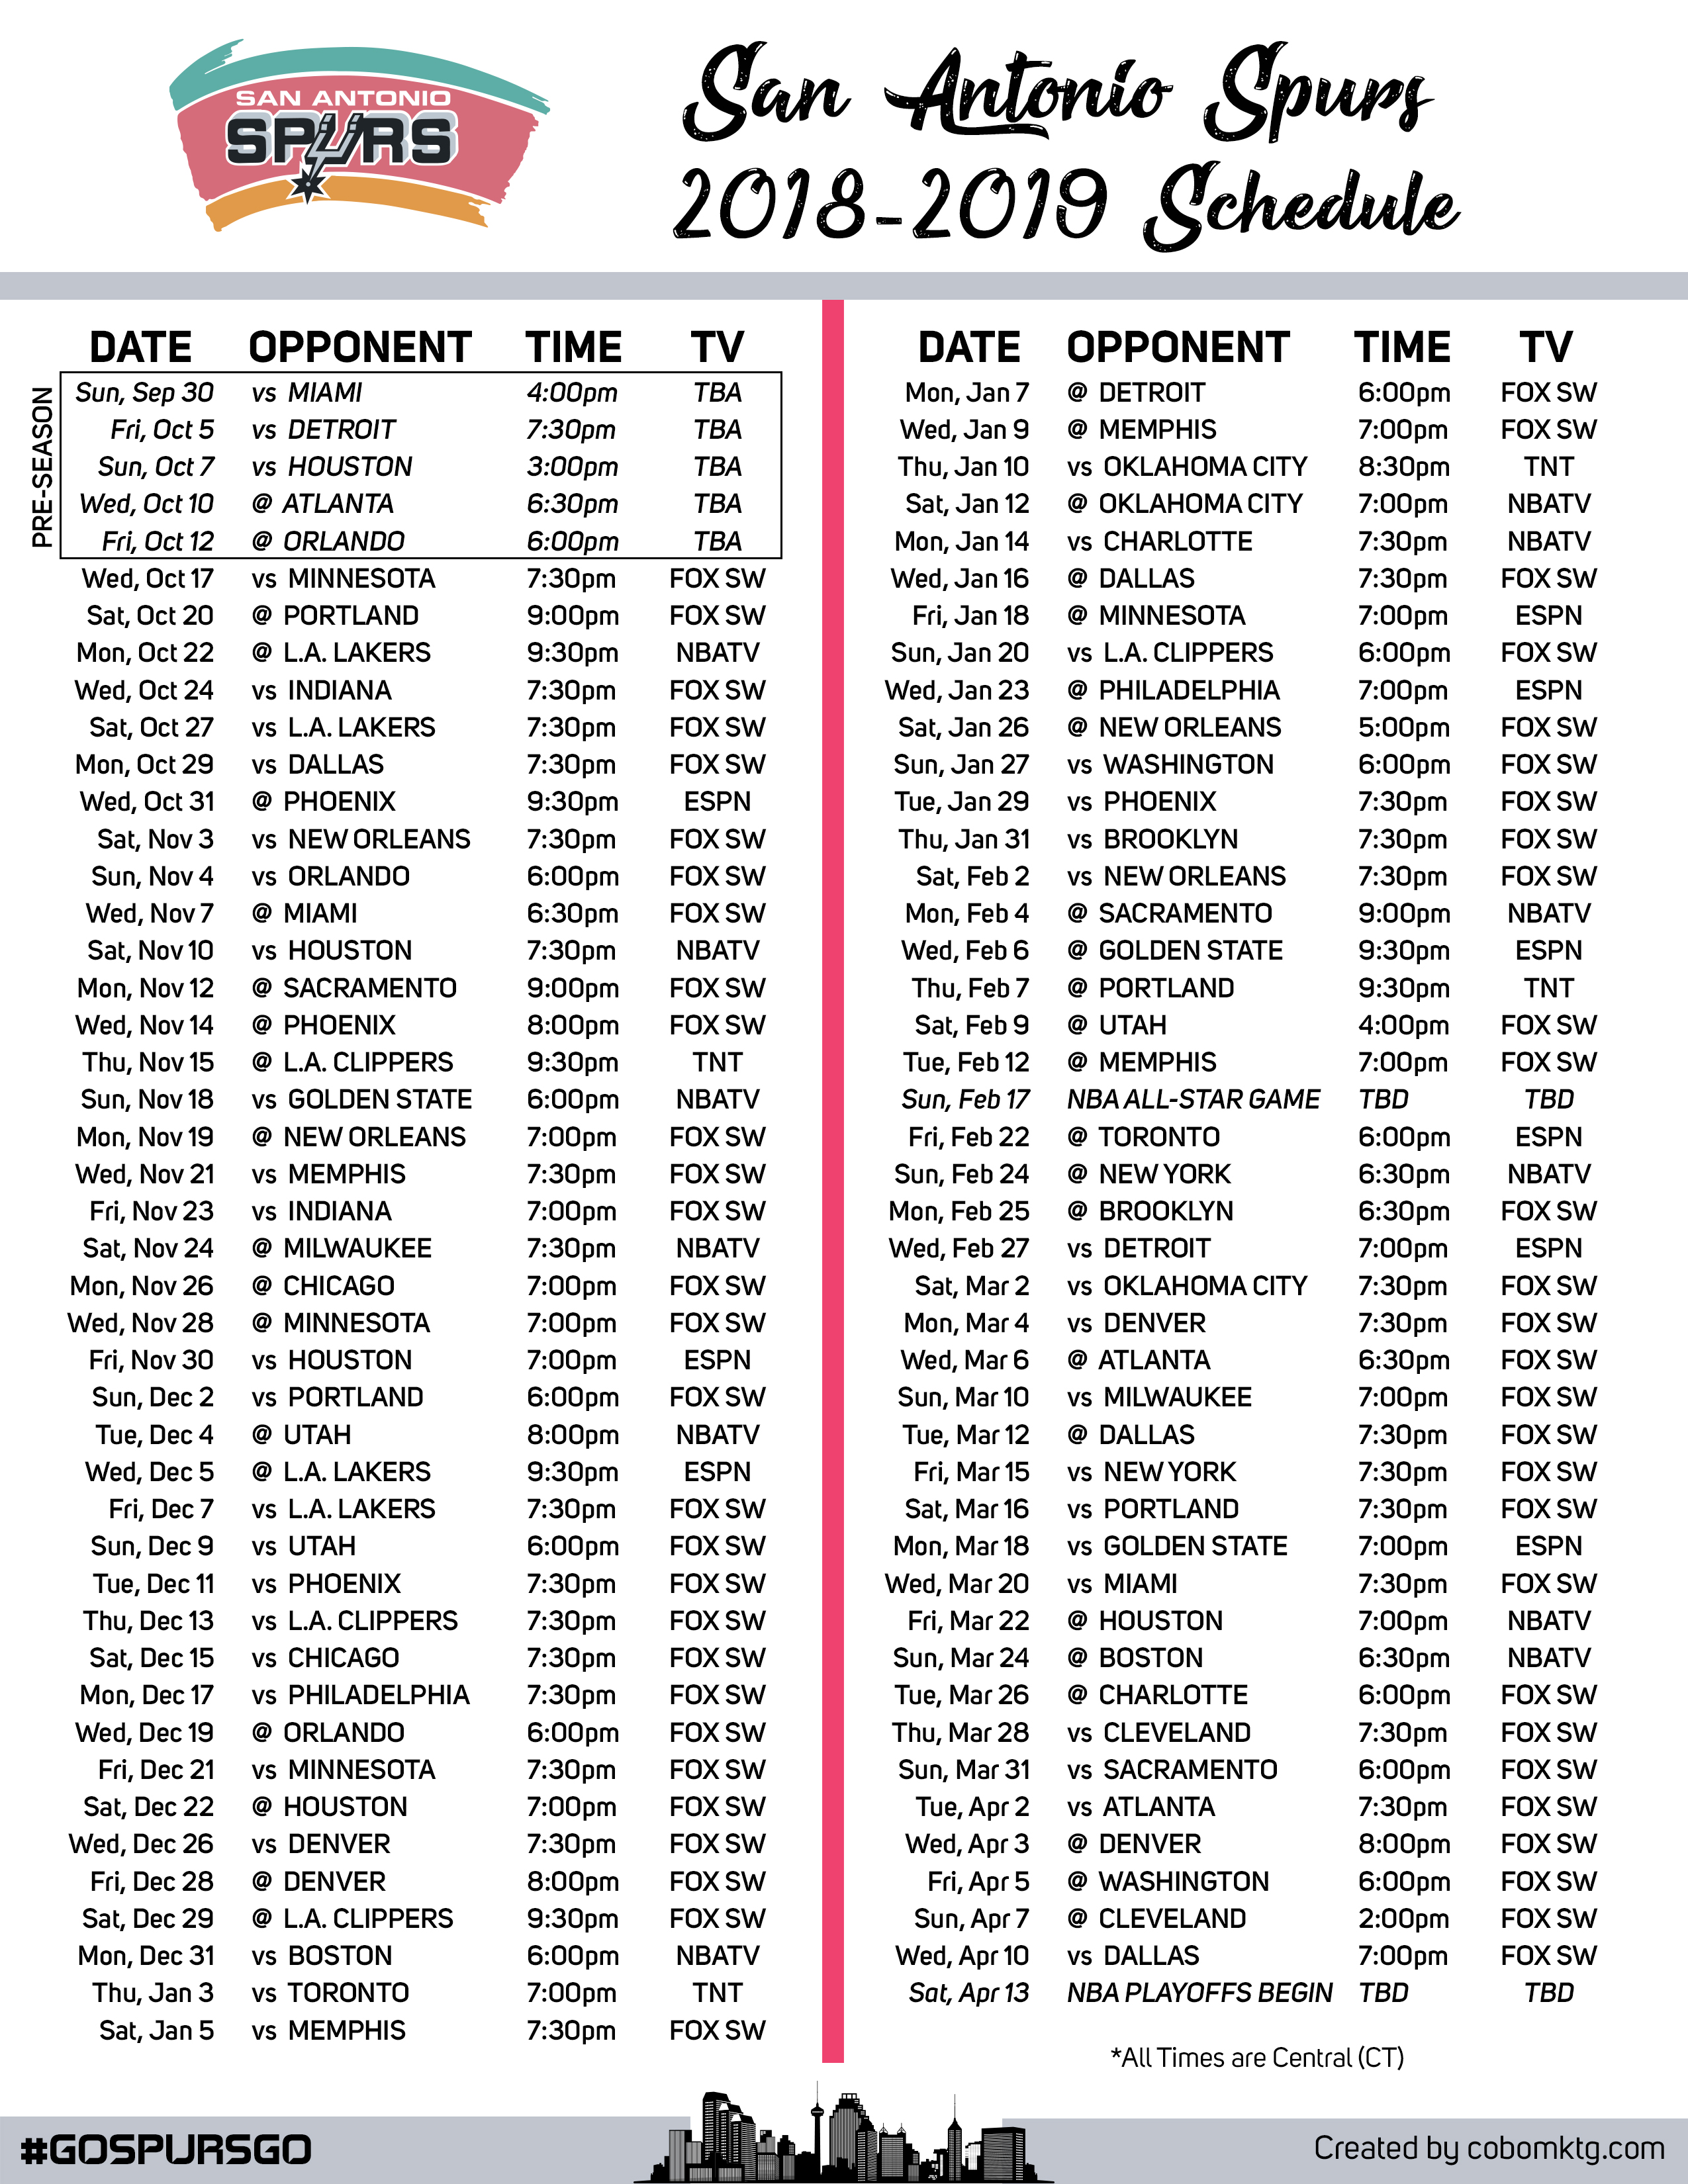 2018-2019 San Antonio Spurs Printable Schedule with TV and Central Times.